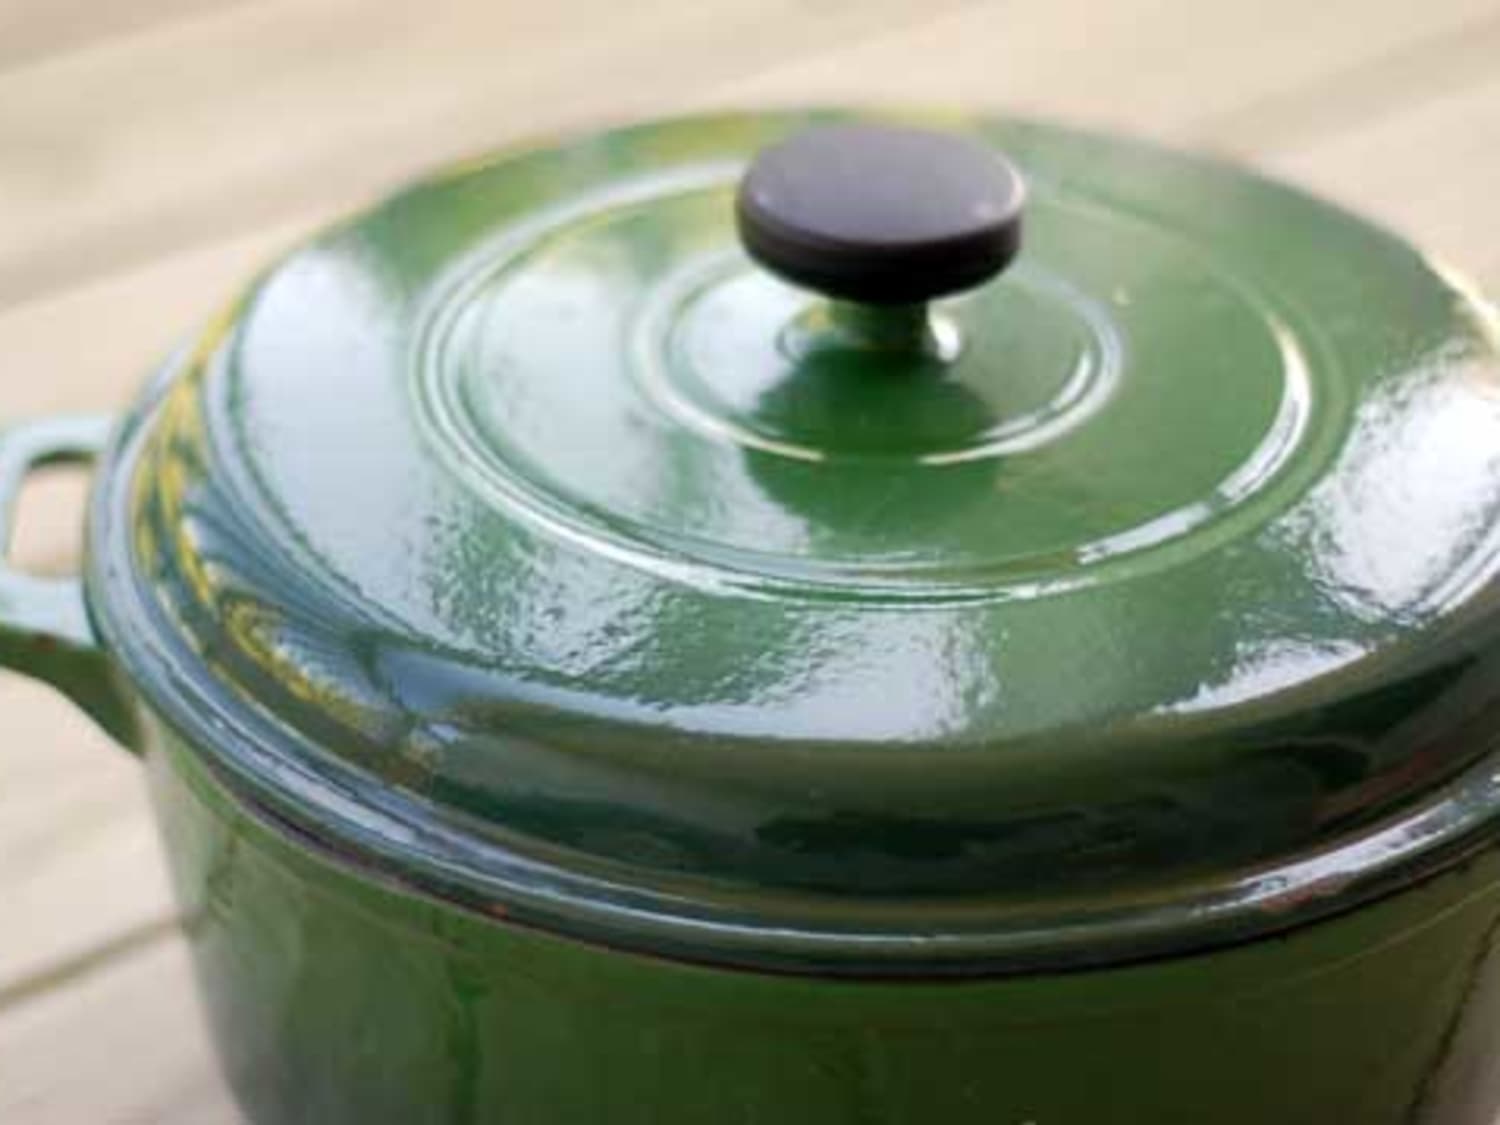 Blog - Choose the Best Dutch Oven - 5 Features to Consider - Dutch